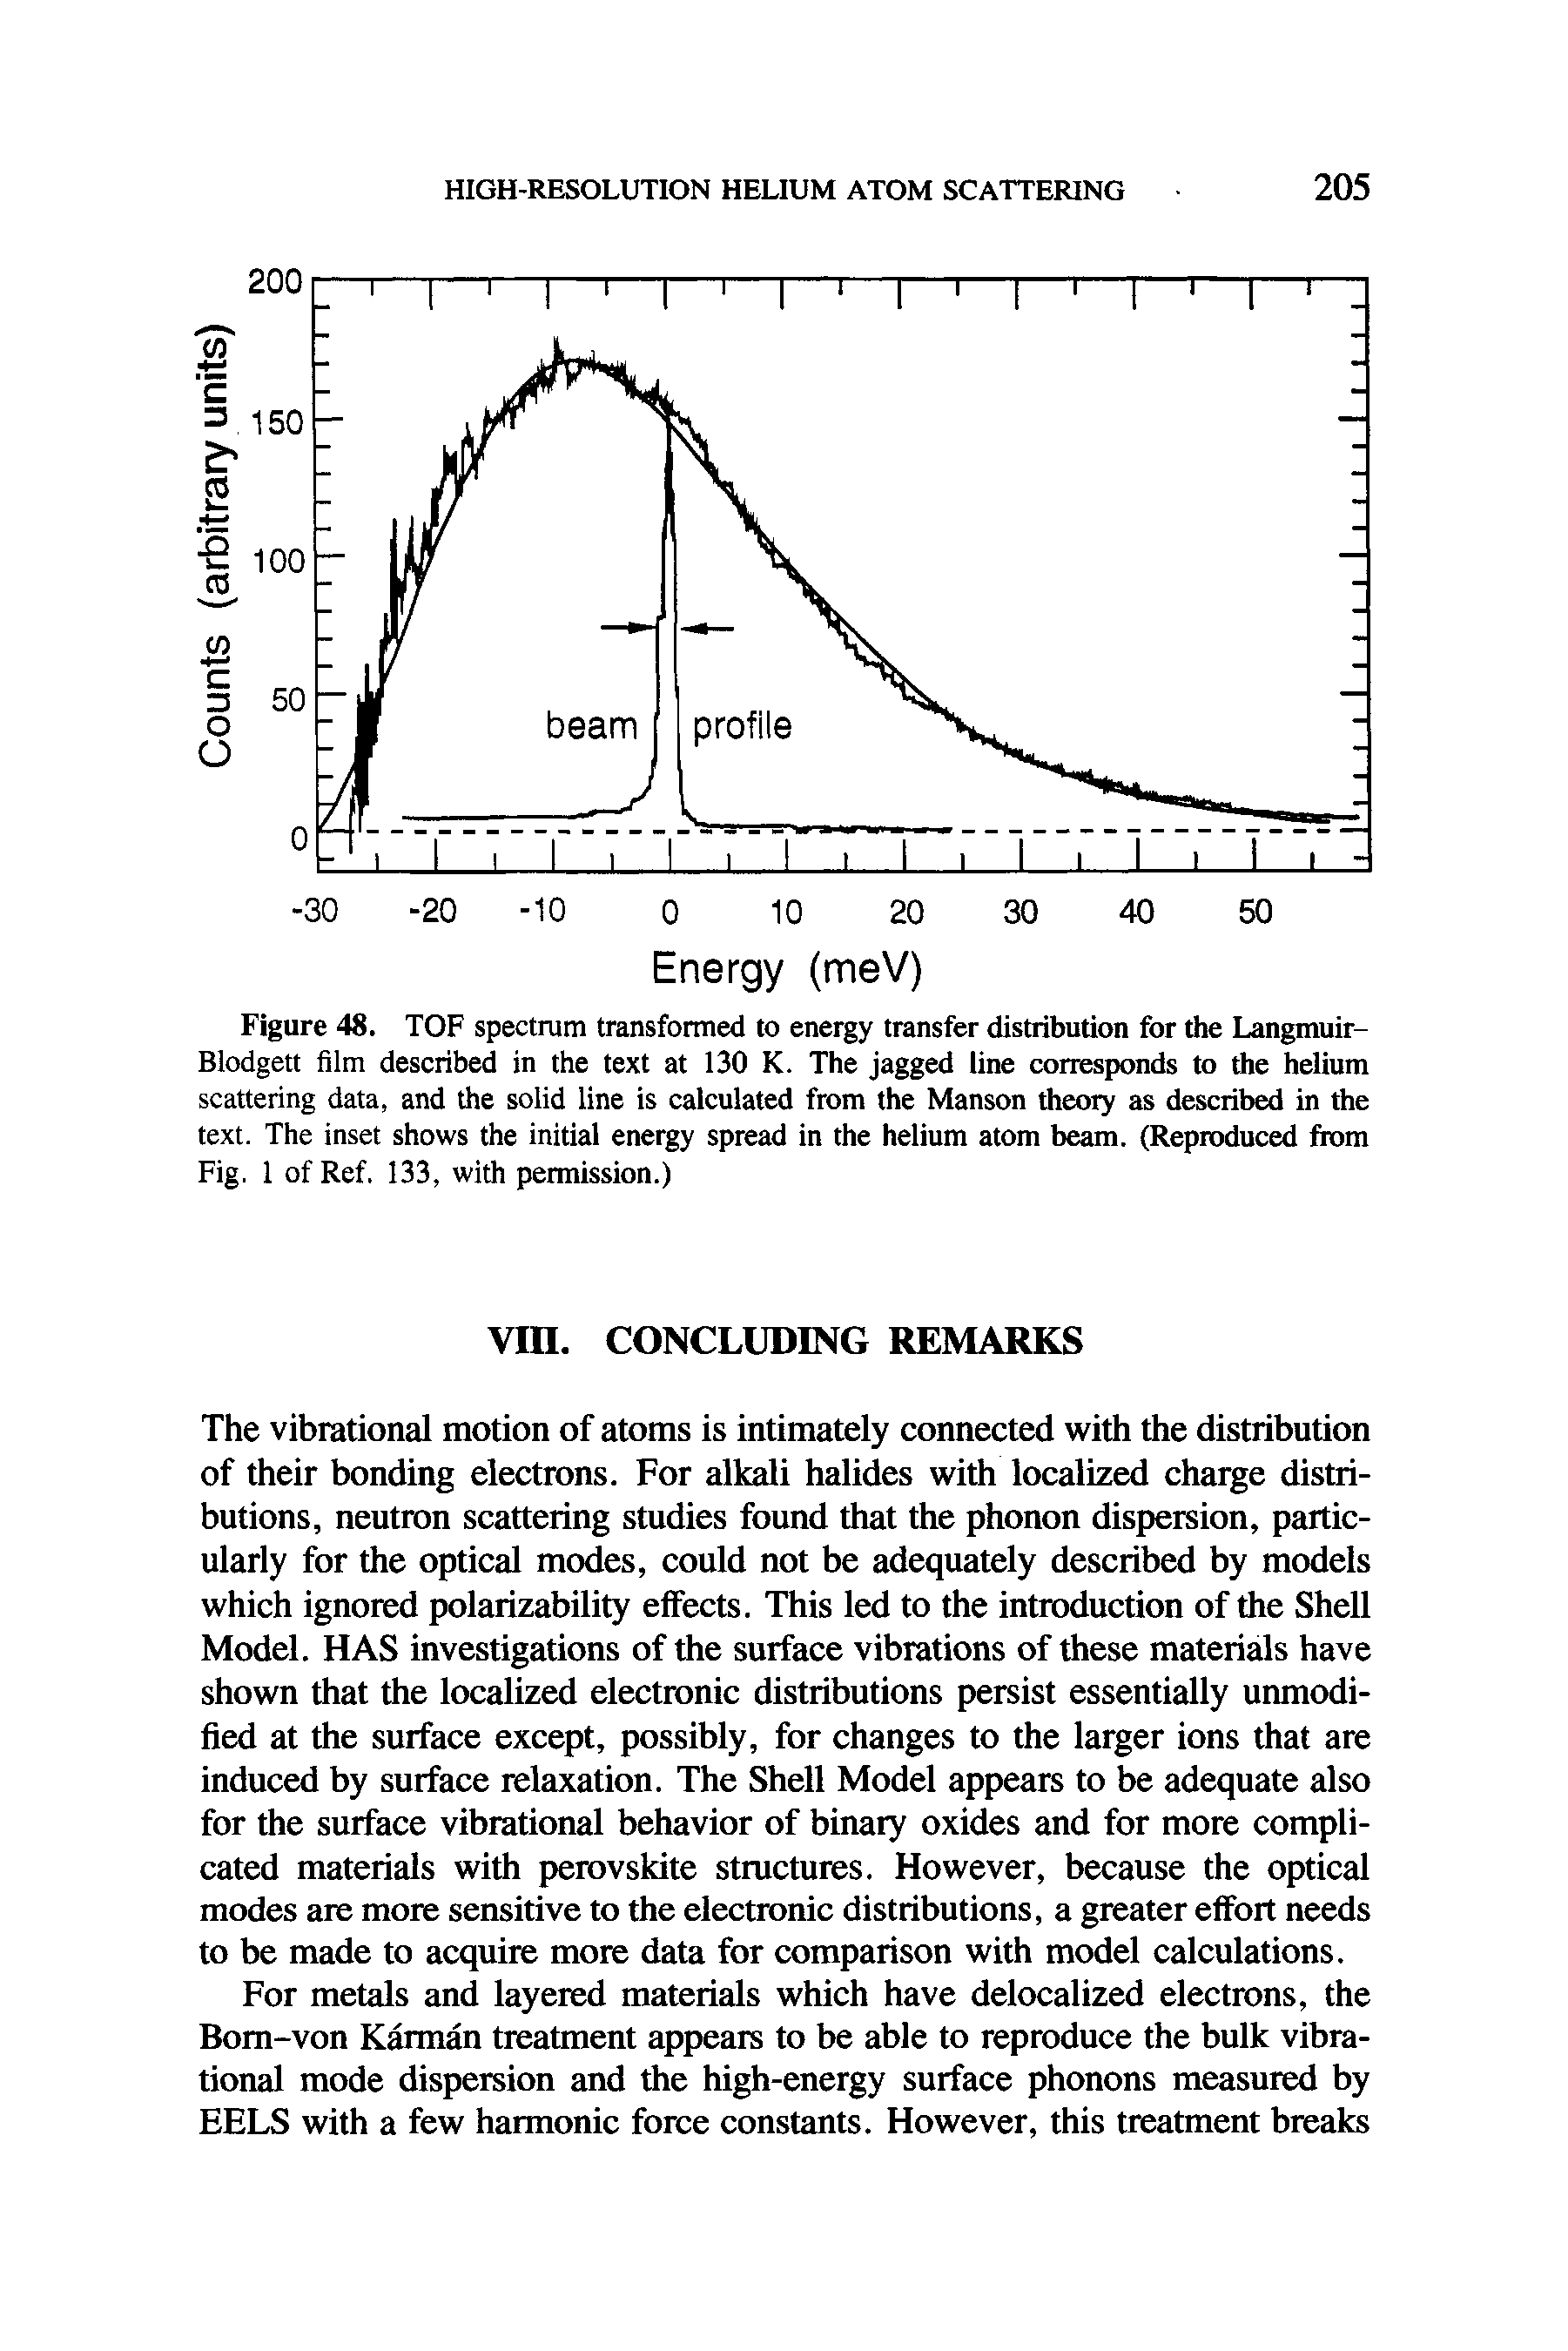 Figure 48. TOF spectrum transformed to energy transfer distribution for the Langmuir-Blodgett film described in the text at 130 K. The jagged line corresponds to the helium scattering data, and the solid line is calculated from the Manson theoty as described in the text. The inset shows the initial energy spread in the helium atom beam. (Reproduced from Fig. 1 of Ref, 133, with permission.)...